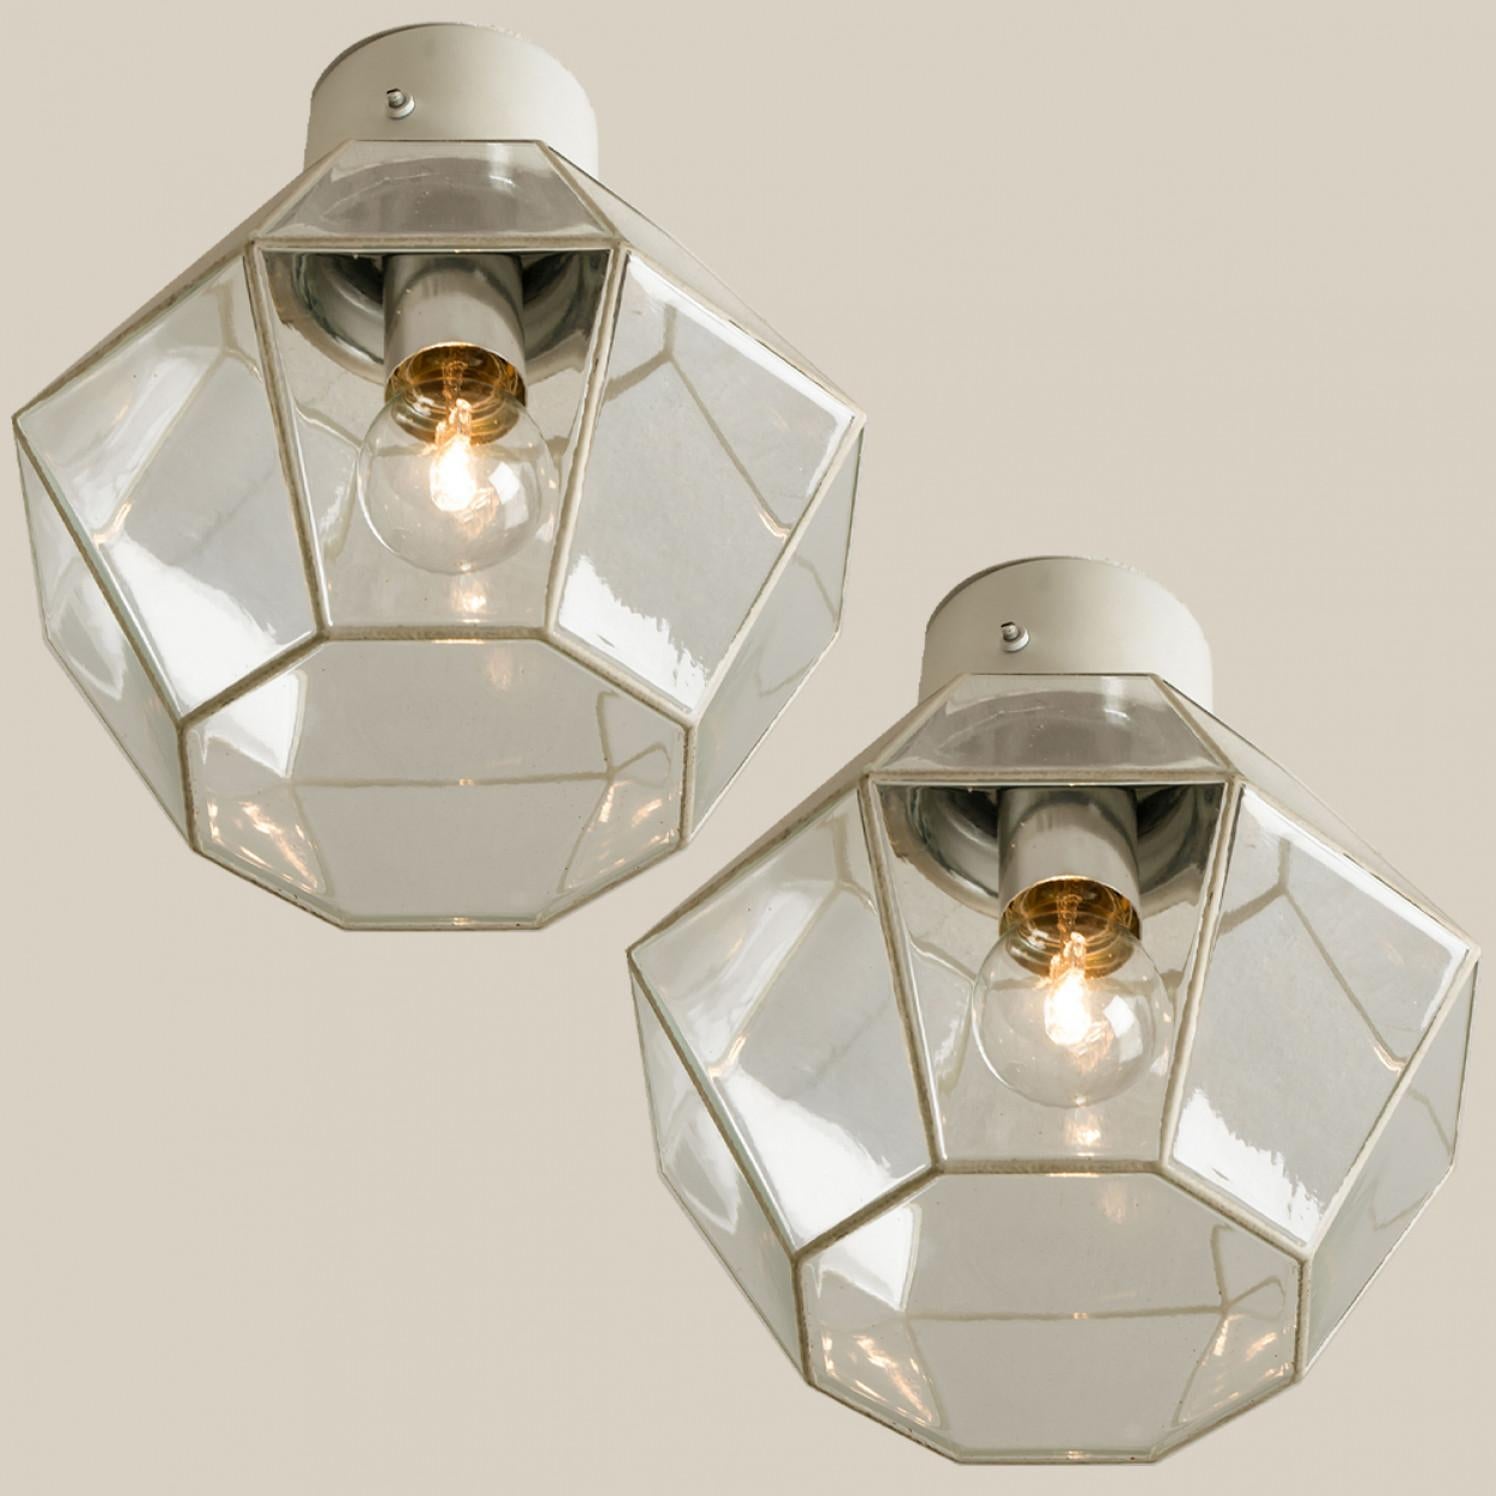 A beautiful set of octagonal glass light flush mounts or wall lights, manufactured by Glasshütte Limburg in Germany during the 1970s. Beautiful craftsmanship. Illuminates beautifully.

Please note the price is for one piece. Two pieces